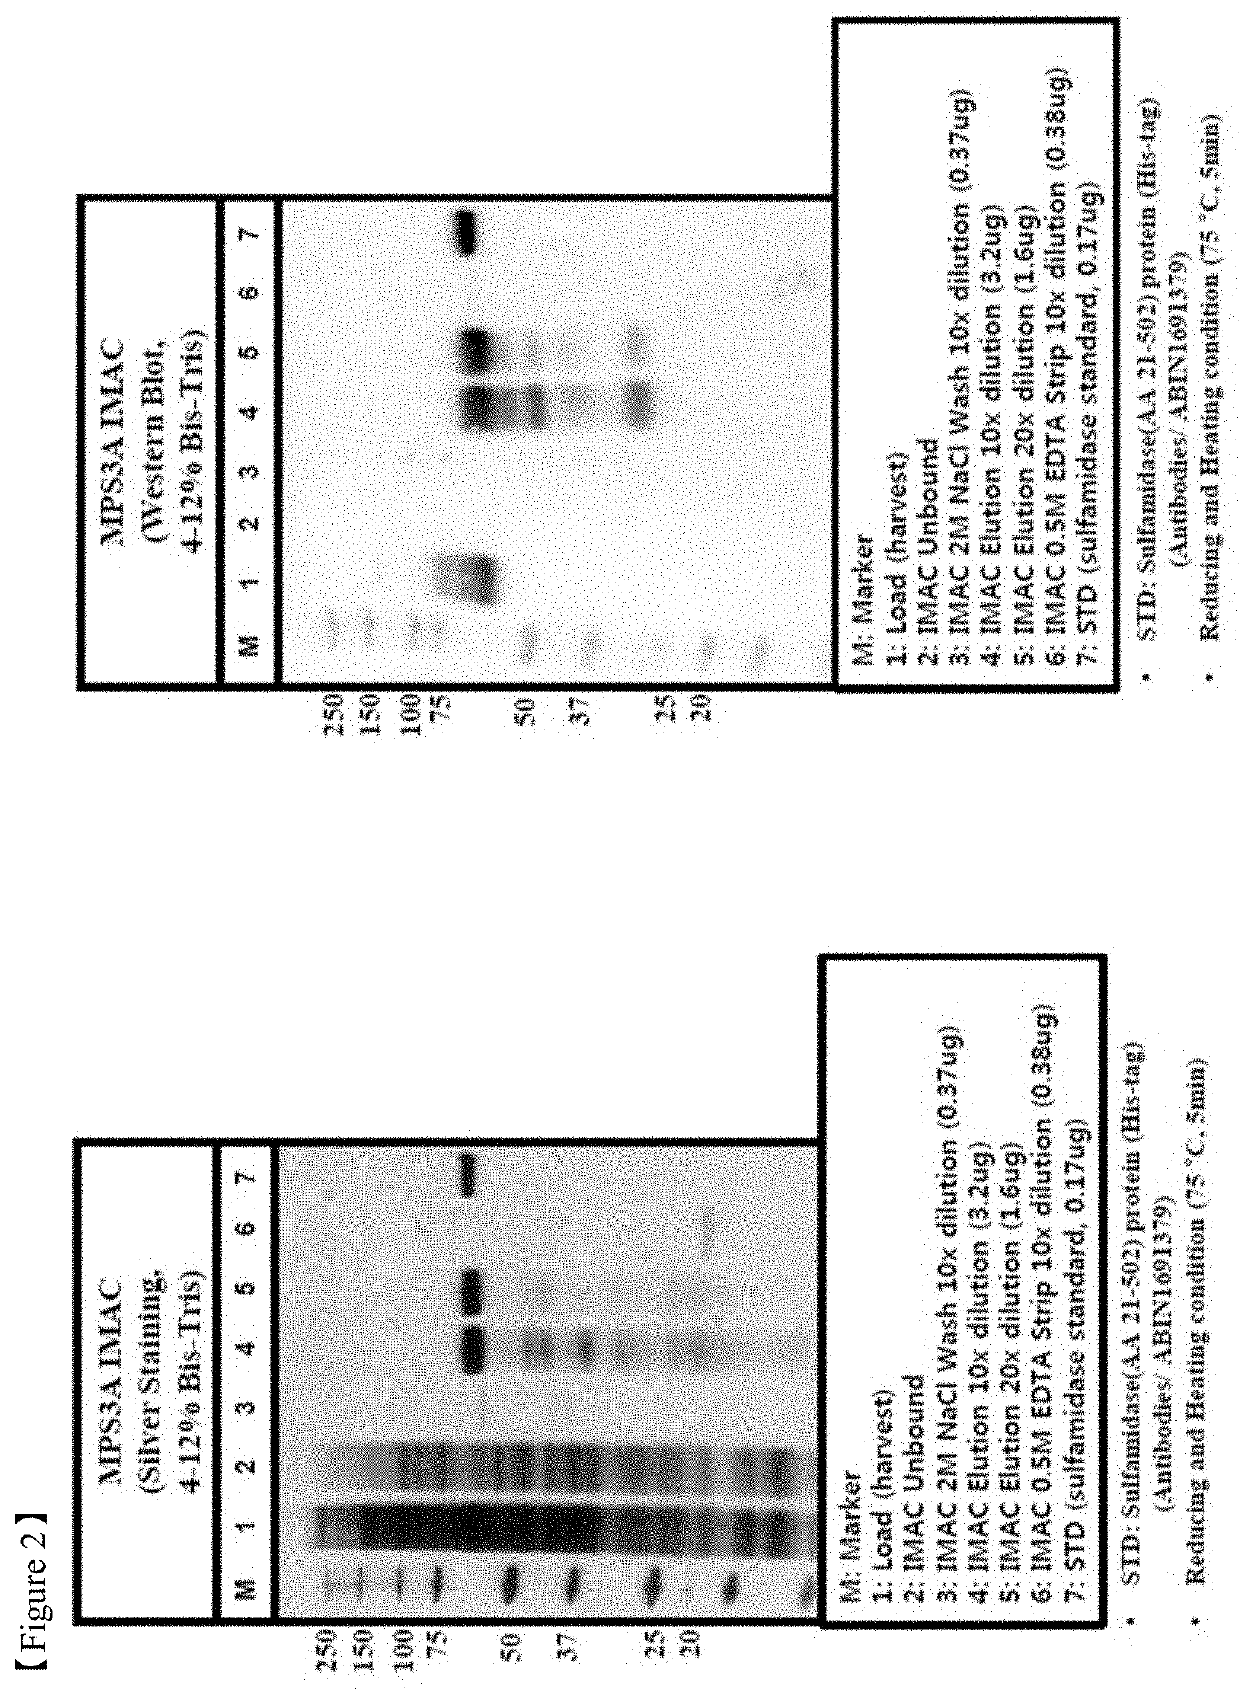 Method for purifying a sulfatase protein